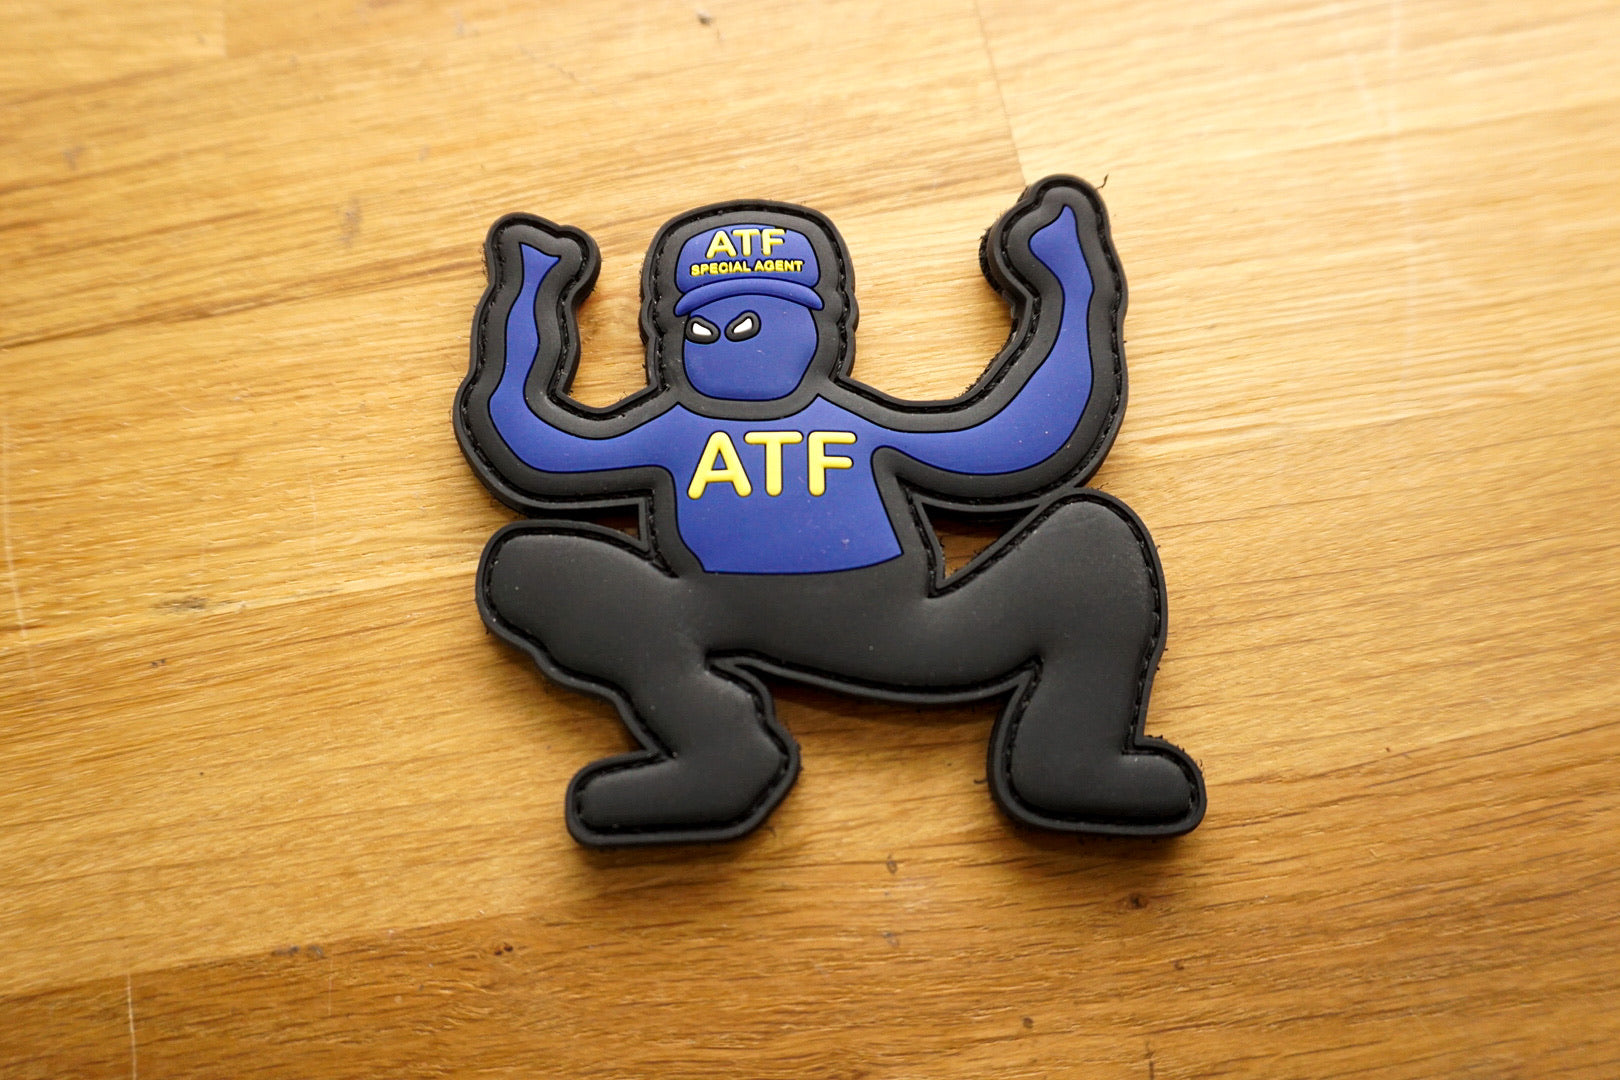 ATF REEEE Morale Patch